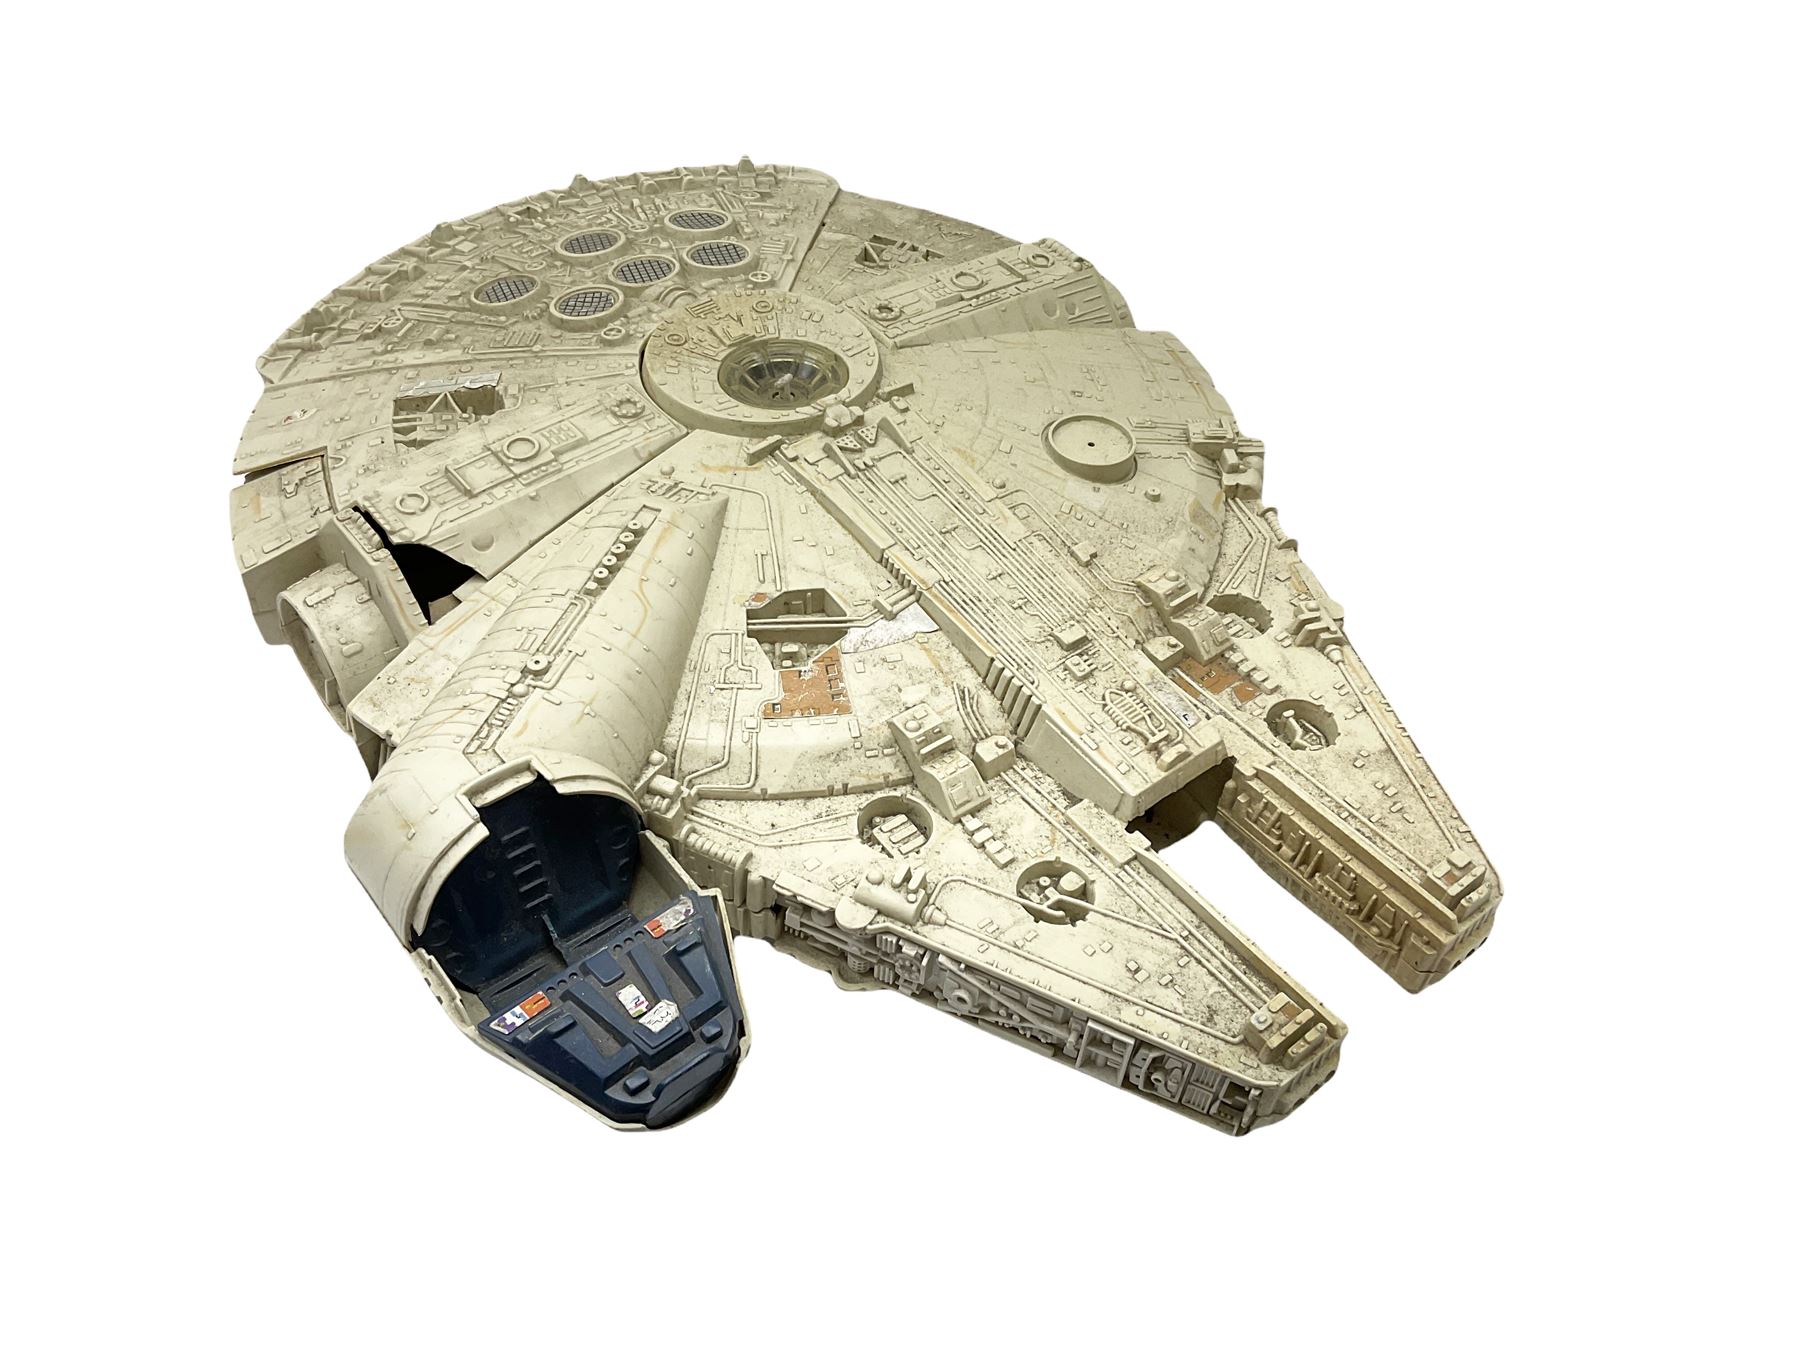 Star Wars - collection of various scale vehicles including two Millenium Falcons - Image 15 of 15